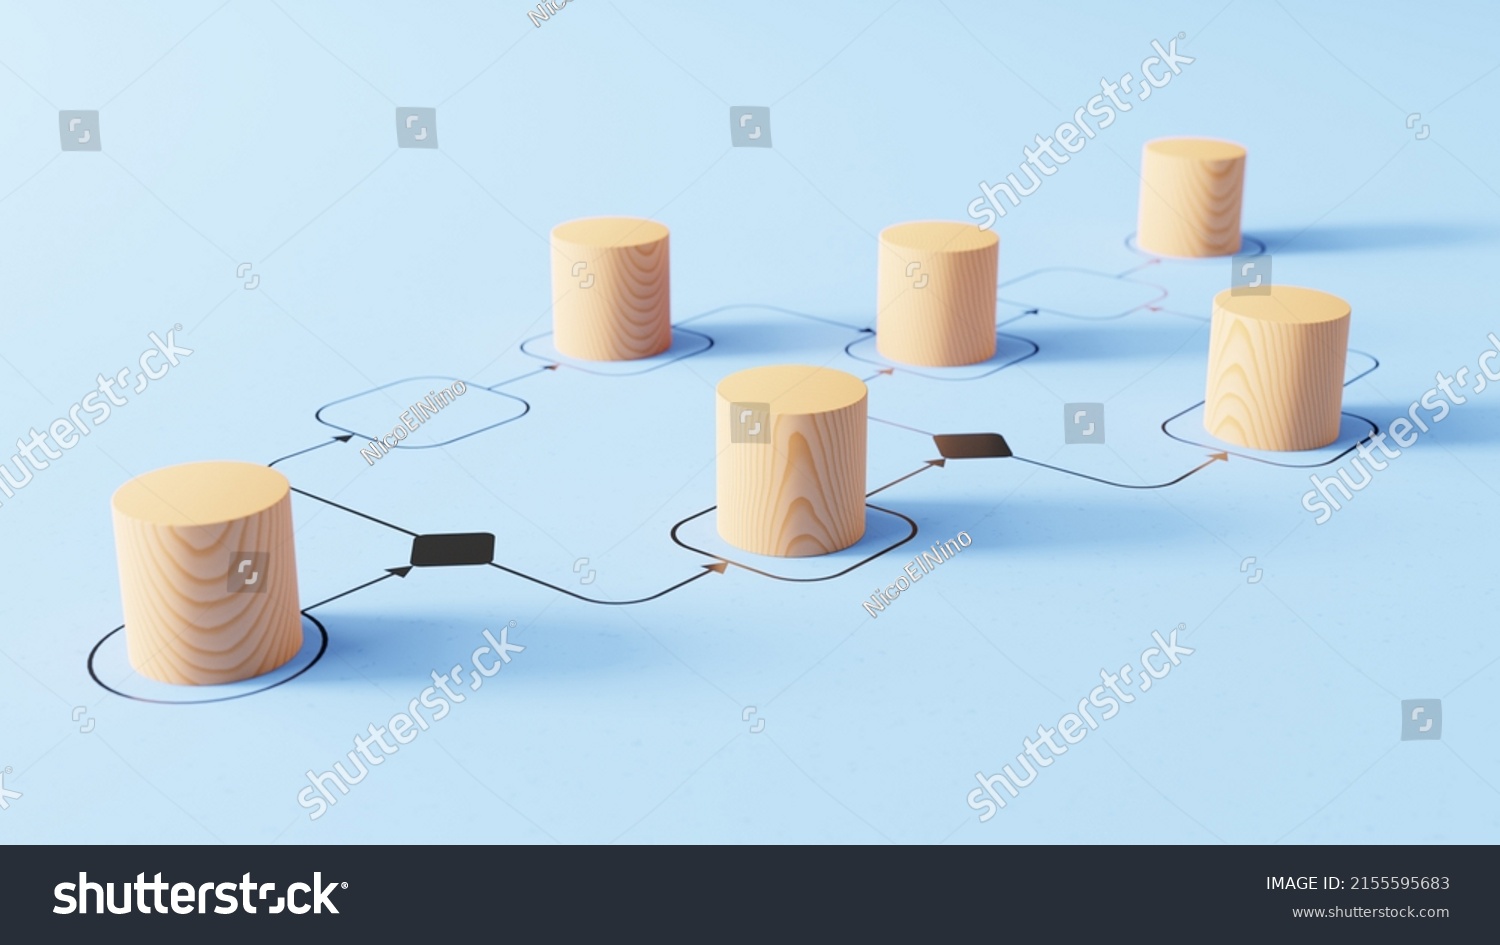 Business process management and automation concept with wooden pieces on flowchart diagram. Workflow implementation to improve productivity and efficiency. Management and organization. #2155595683